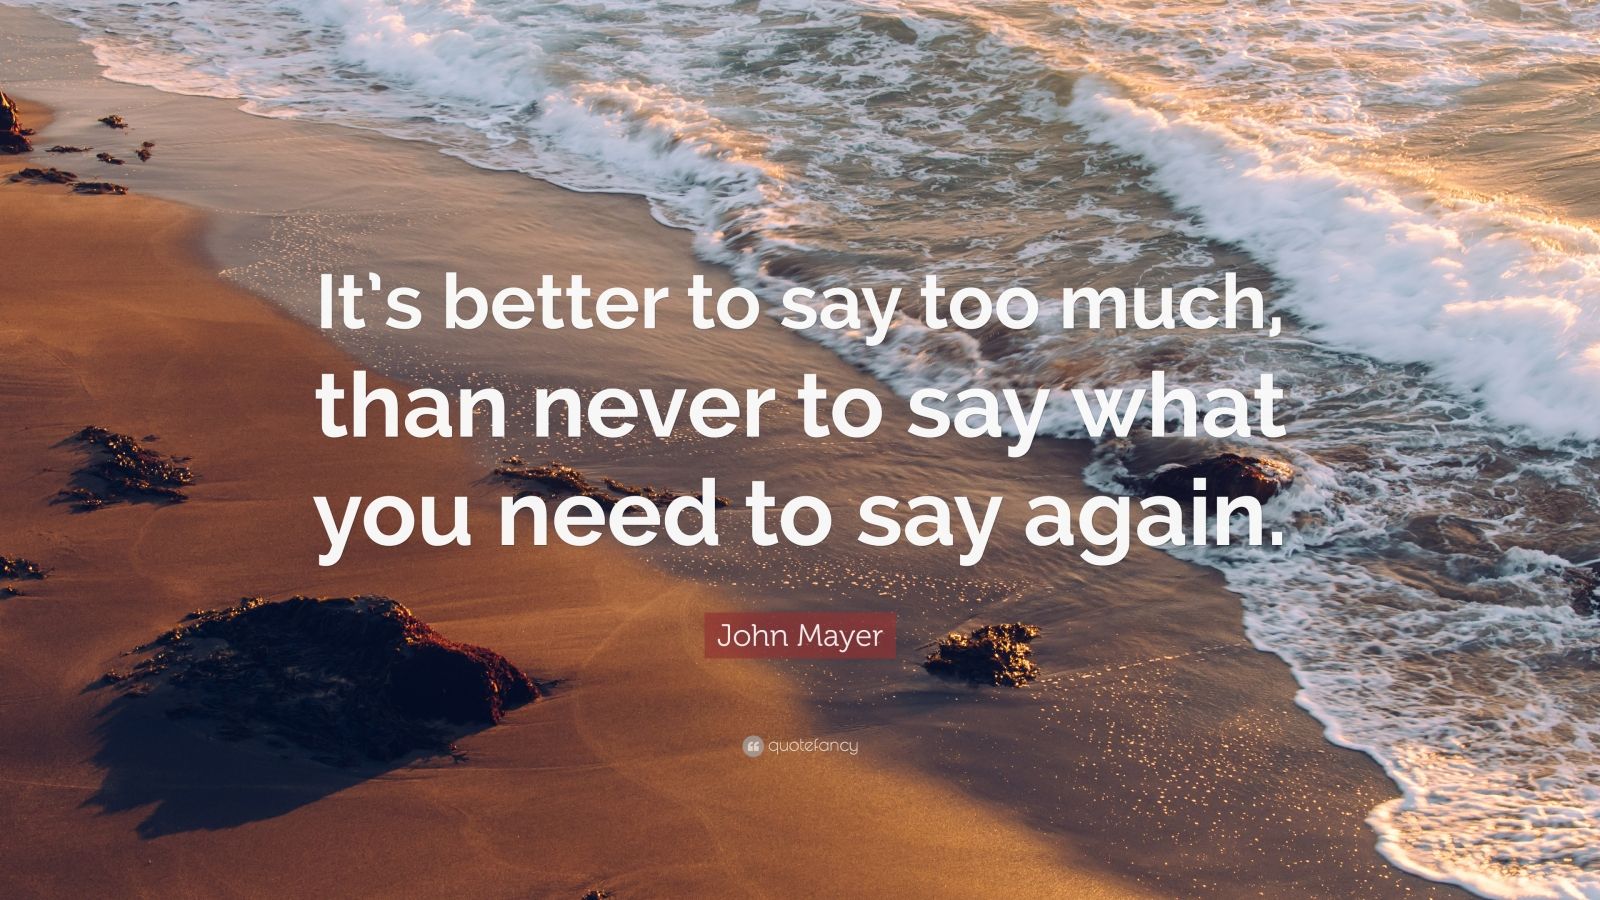 John Mayer Quote: "It's better to say too much, than never ...